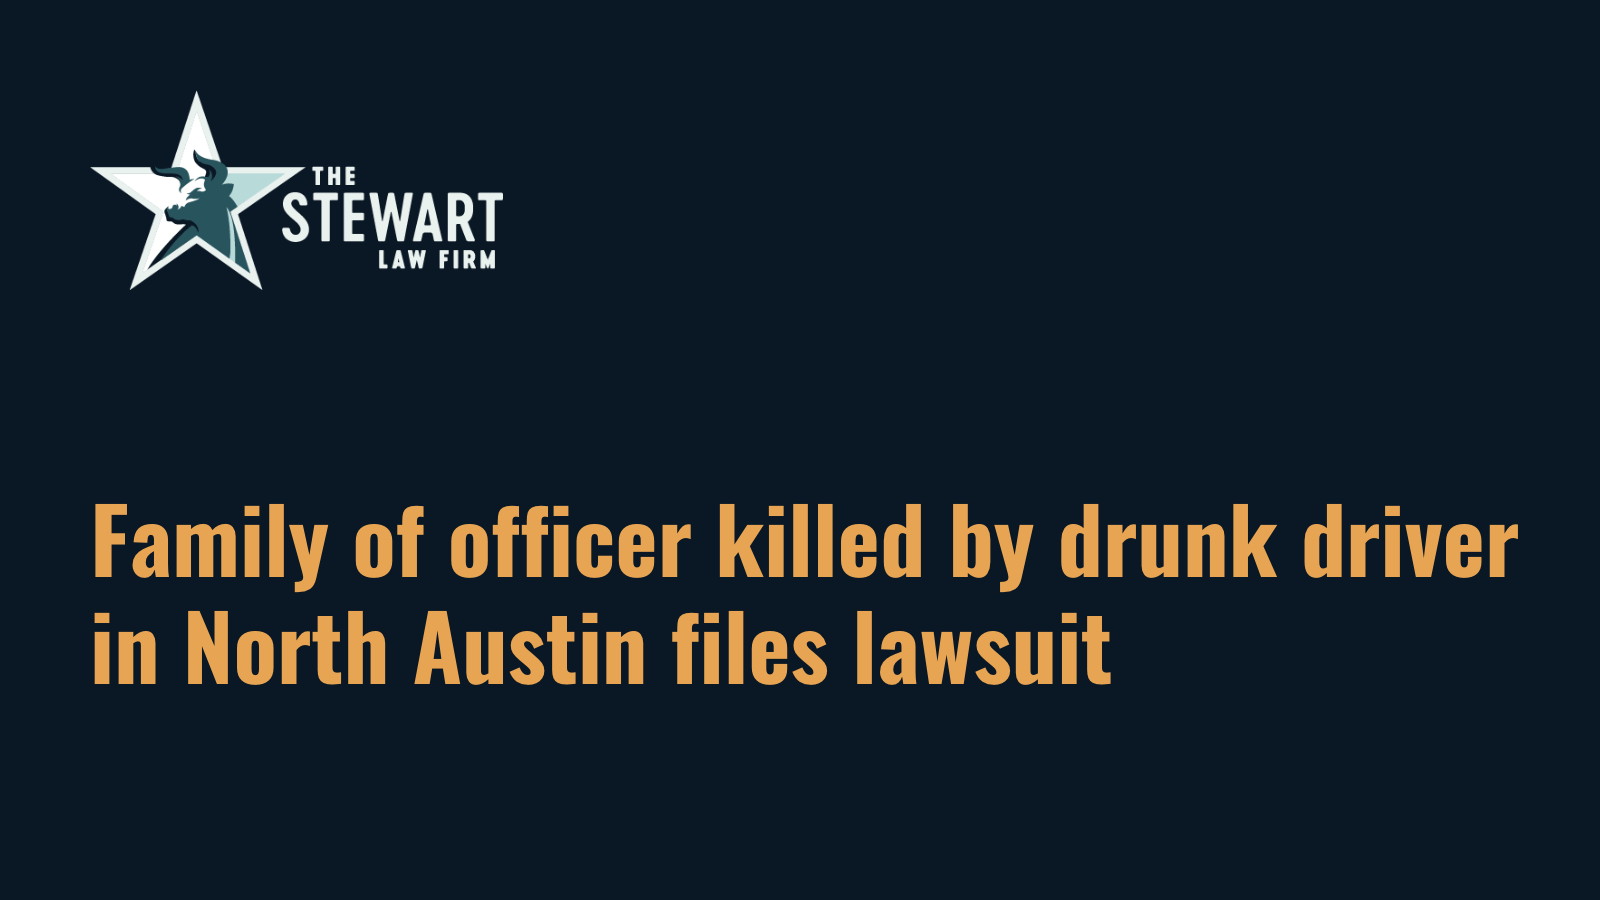 Family of officer killed by drunk driver in North Austin texas files lawsuit - the stewart law firm - austin texas personal injury lawyer